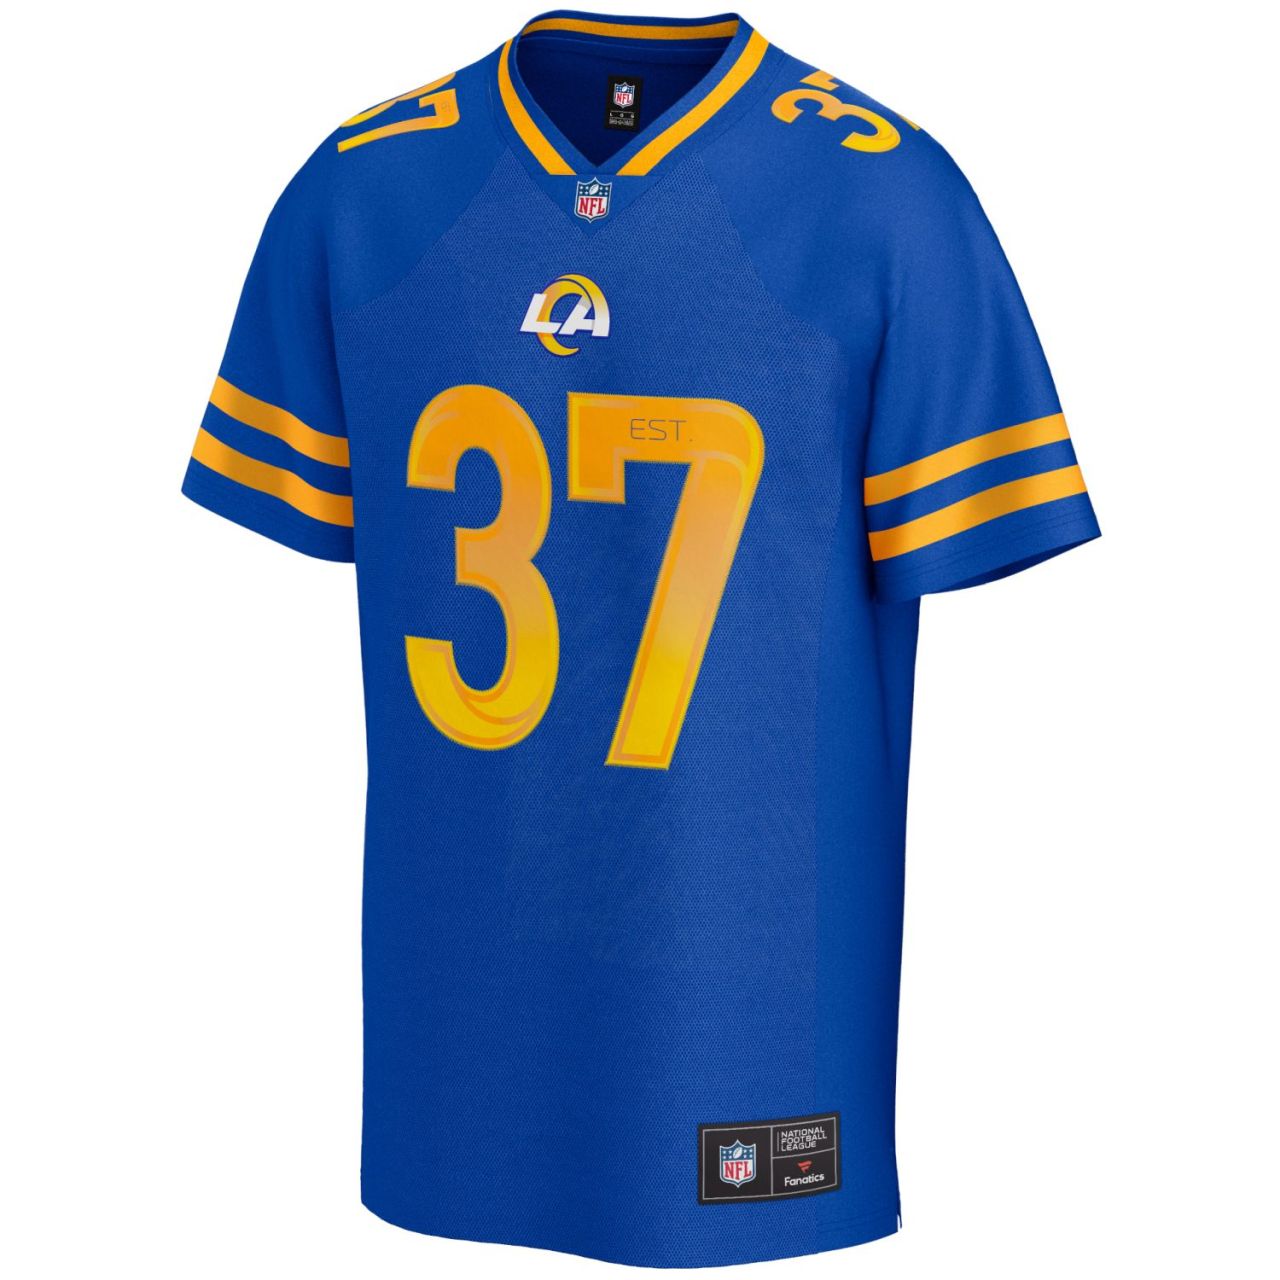 Los Angeles Rams NFL Poly Mesh Supporters Jersey von Fanatics